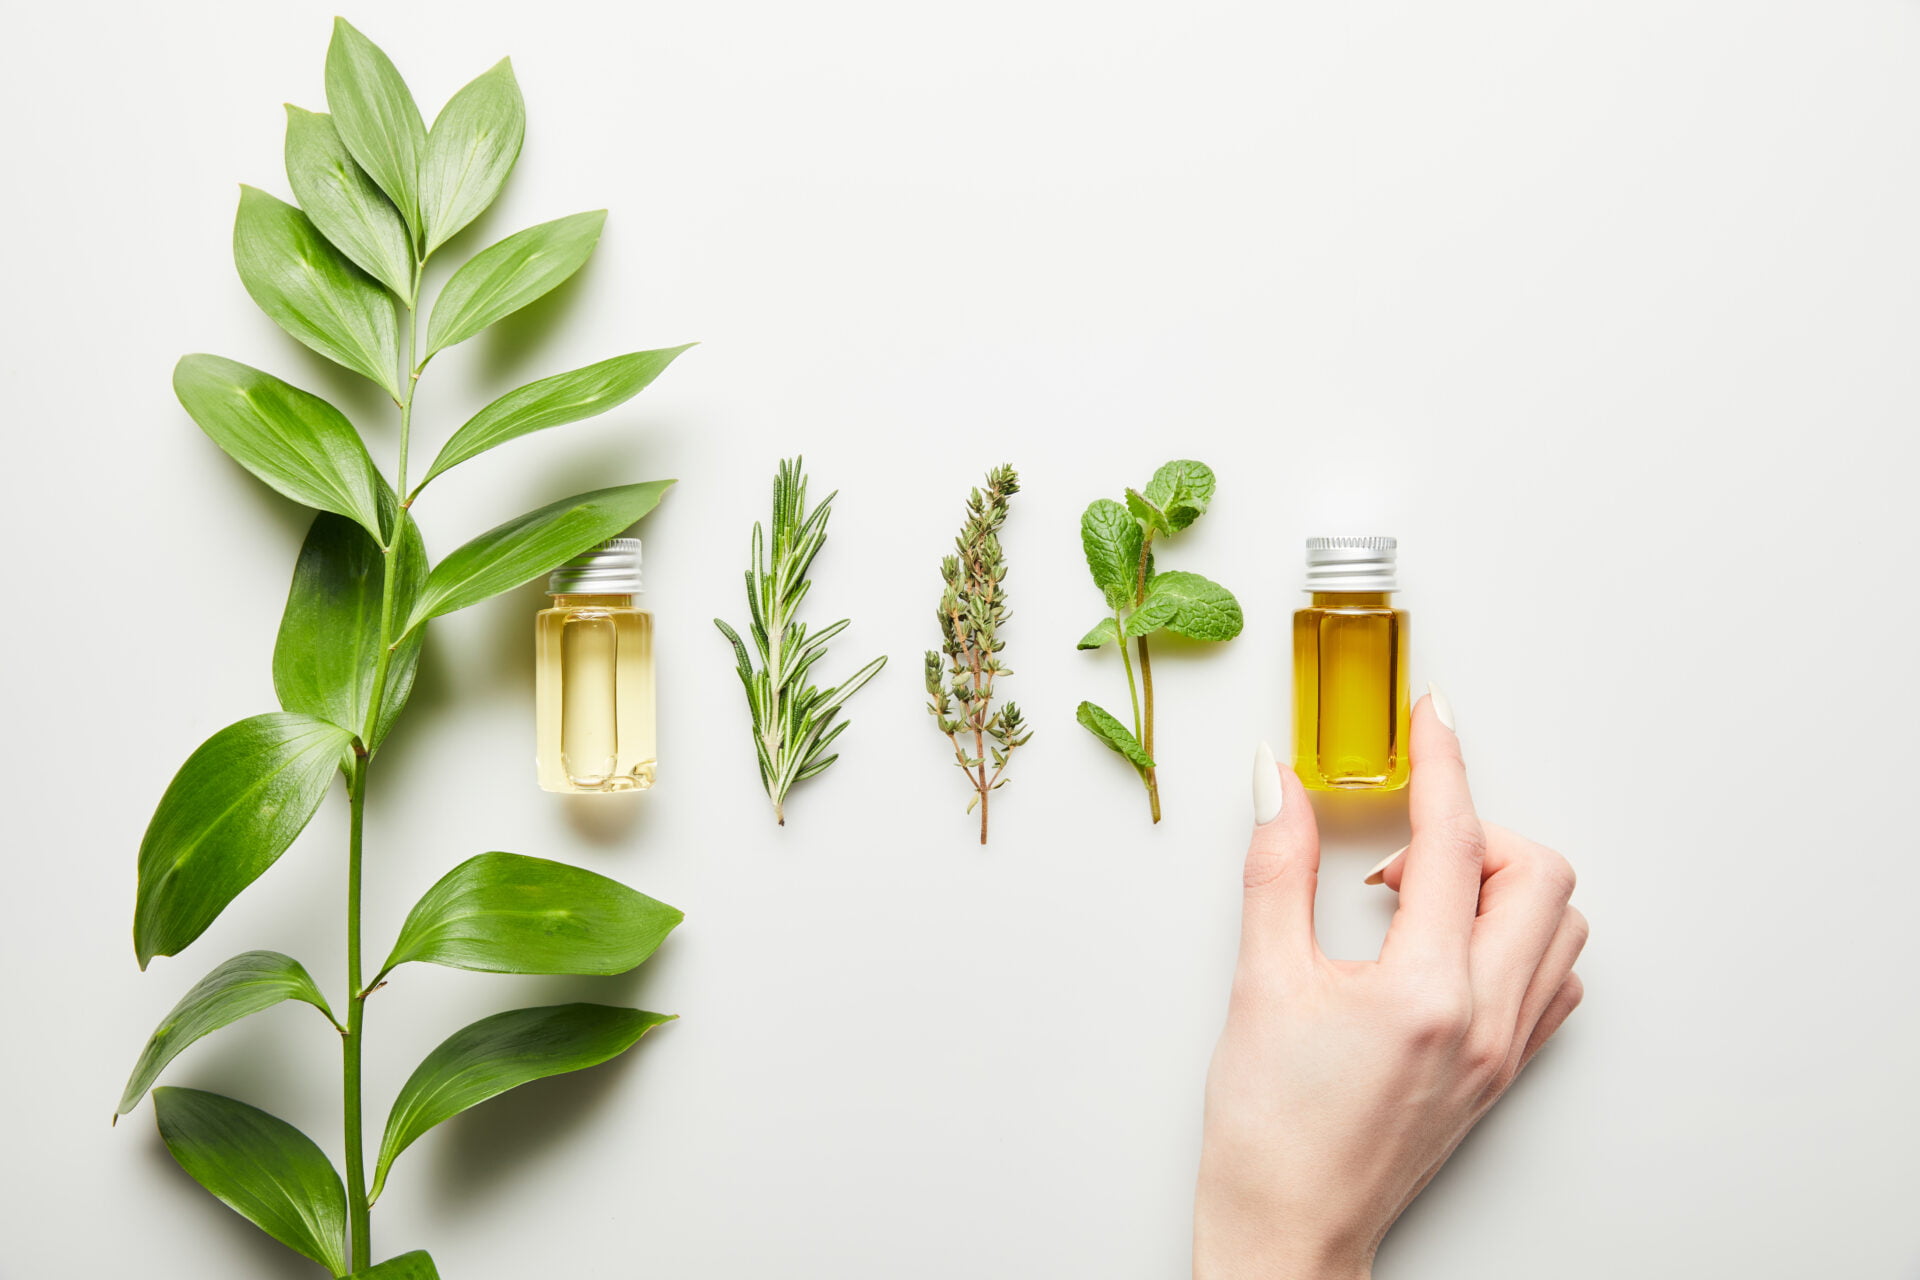 ingredients you'll find in natural body oils made from the safest ingredients